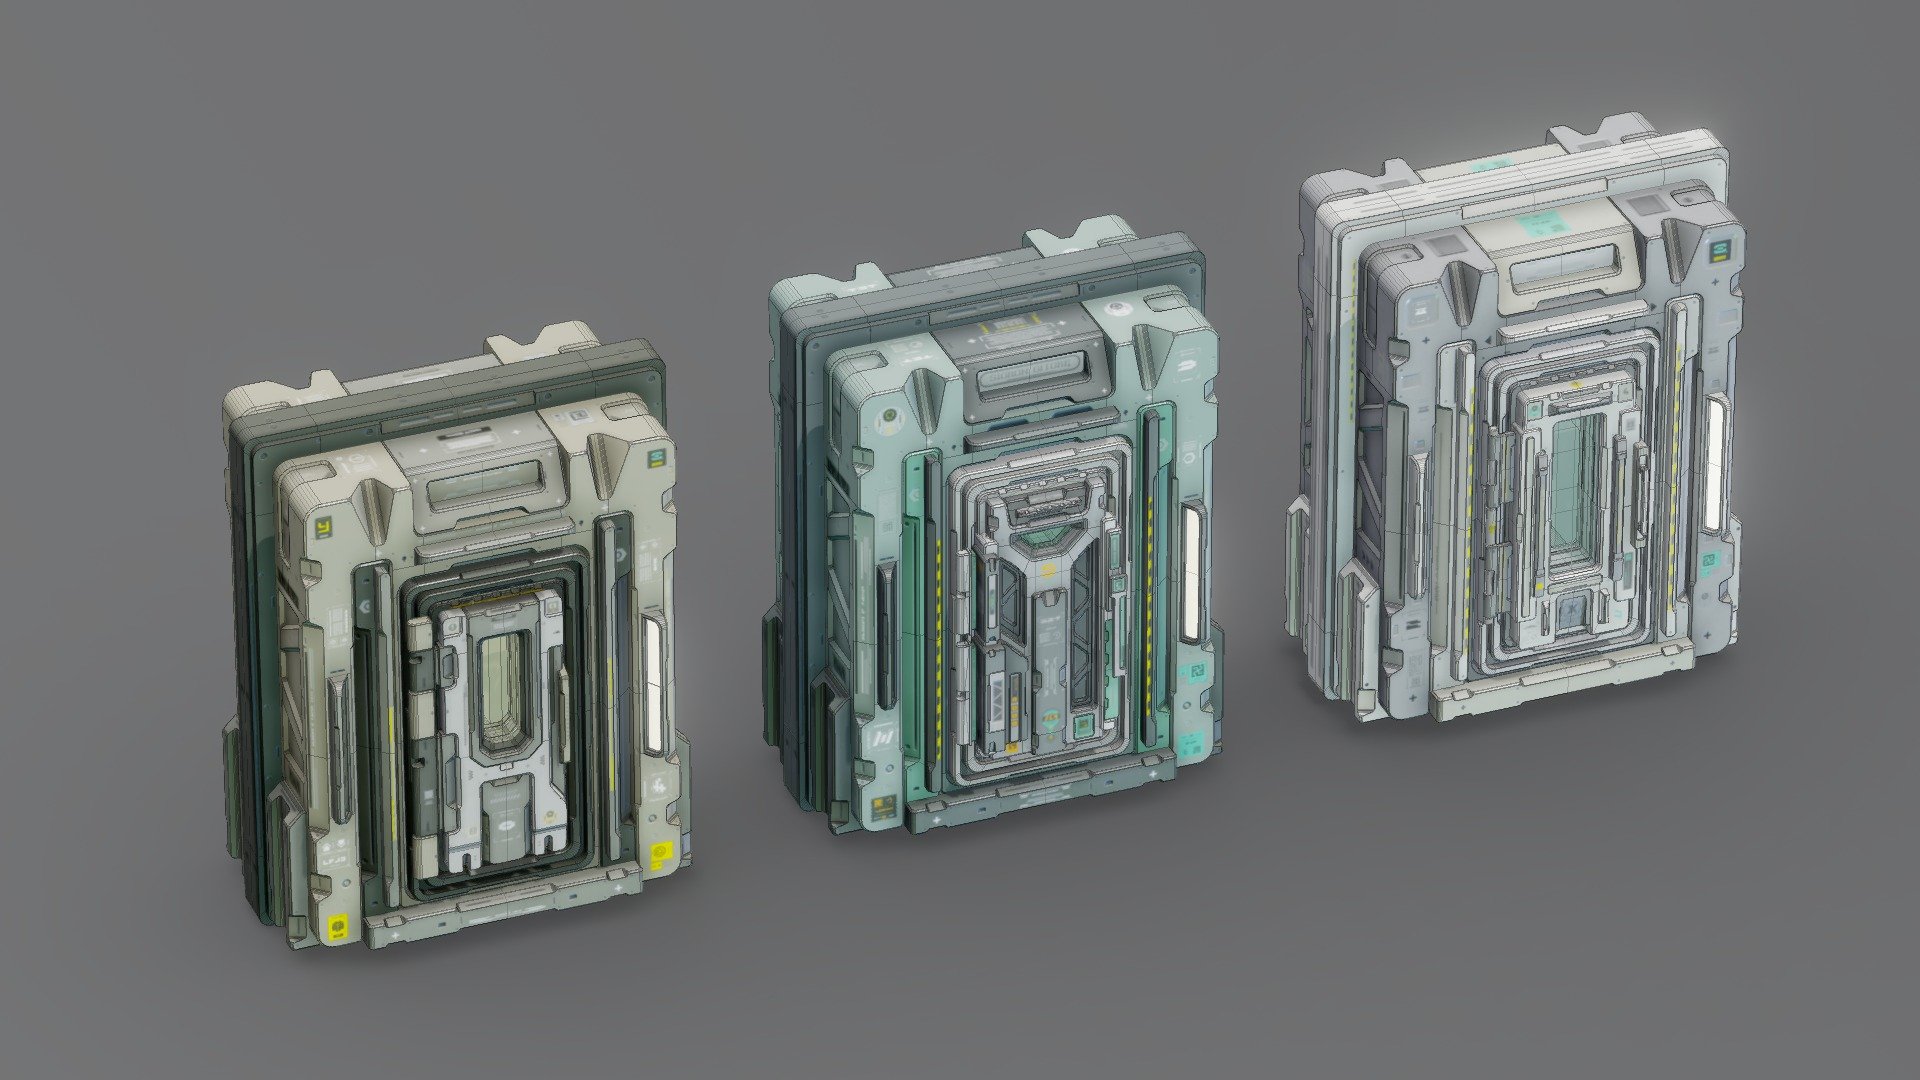 Scifi Doors Vol II
This is the second edition of Sci-Fi Doors, where I have integrated a new workflow much more complete in terms of modeling. Through a lot of research and studies, I have achieved a more aesthetic and orderly character, preserving a hollow geometry that appears to be made up of nested details, thus optimizing the resolution of textures, for this collection, I developed a collection of my own Decals, where I strive for aesthetics rather than realism

In conclusion, this product is a high quality object, the result of a lot of experimentation and research, to create a cyberpunk style art piece.

Technical information

Native format: BLEND 3.2.2
Other formats: OBJ,FBX,Collada,GLTF,
Rendering: Cycles
Substance Painter Textures: JPEG 4K
PBR Textures
Materials: 6

Notes

Mirrored object
Modifiers (Not applied): Bevel - Angle, Weighted normal
Other formats: Modifiers Applied - Scifi Doors Vol II - Buy Royalty Free 3D model by TET.SUO.RIN (@TET_SUO_RIN) 3d model